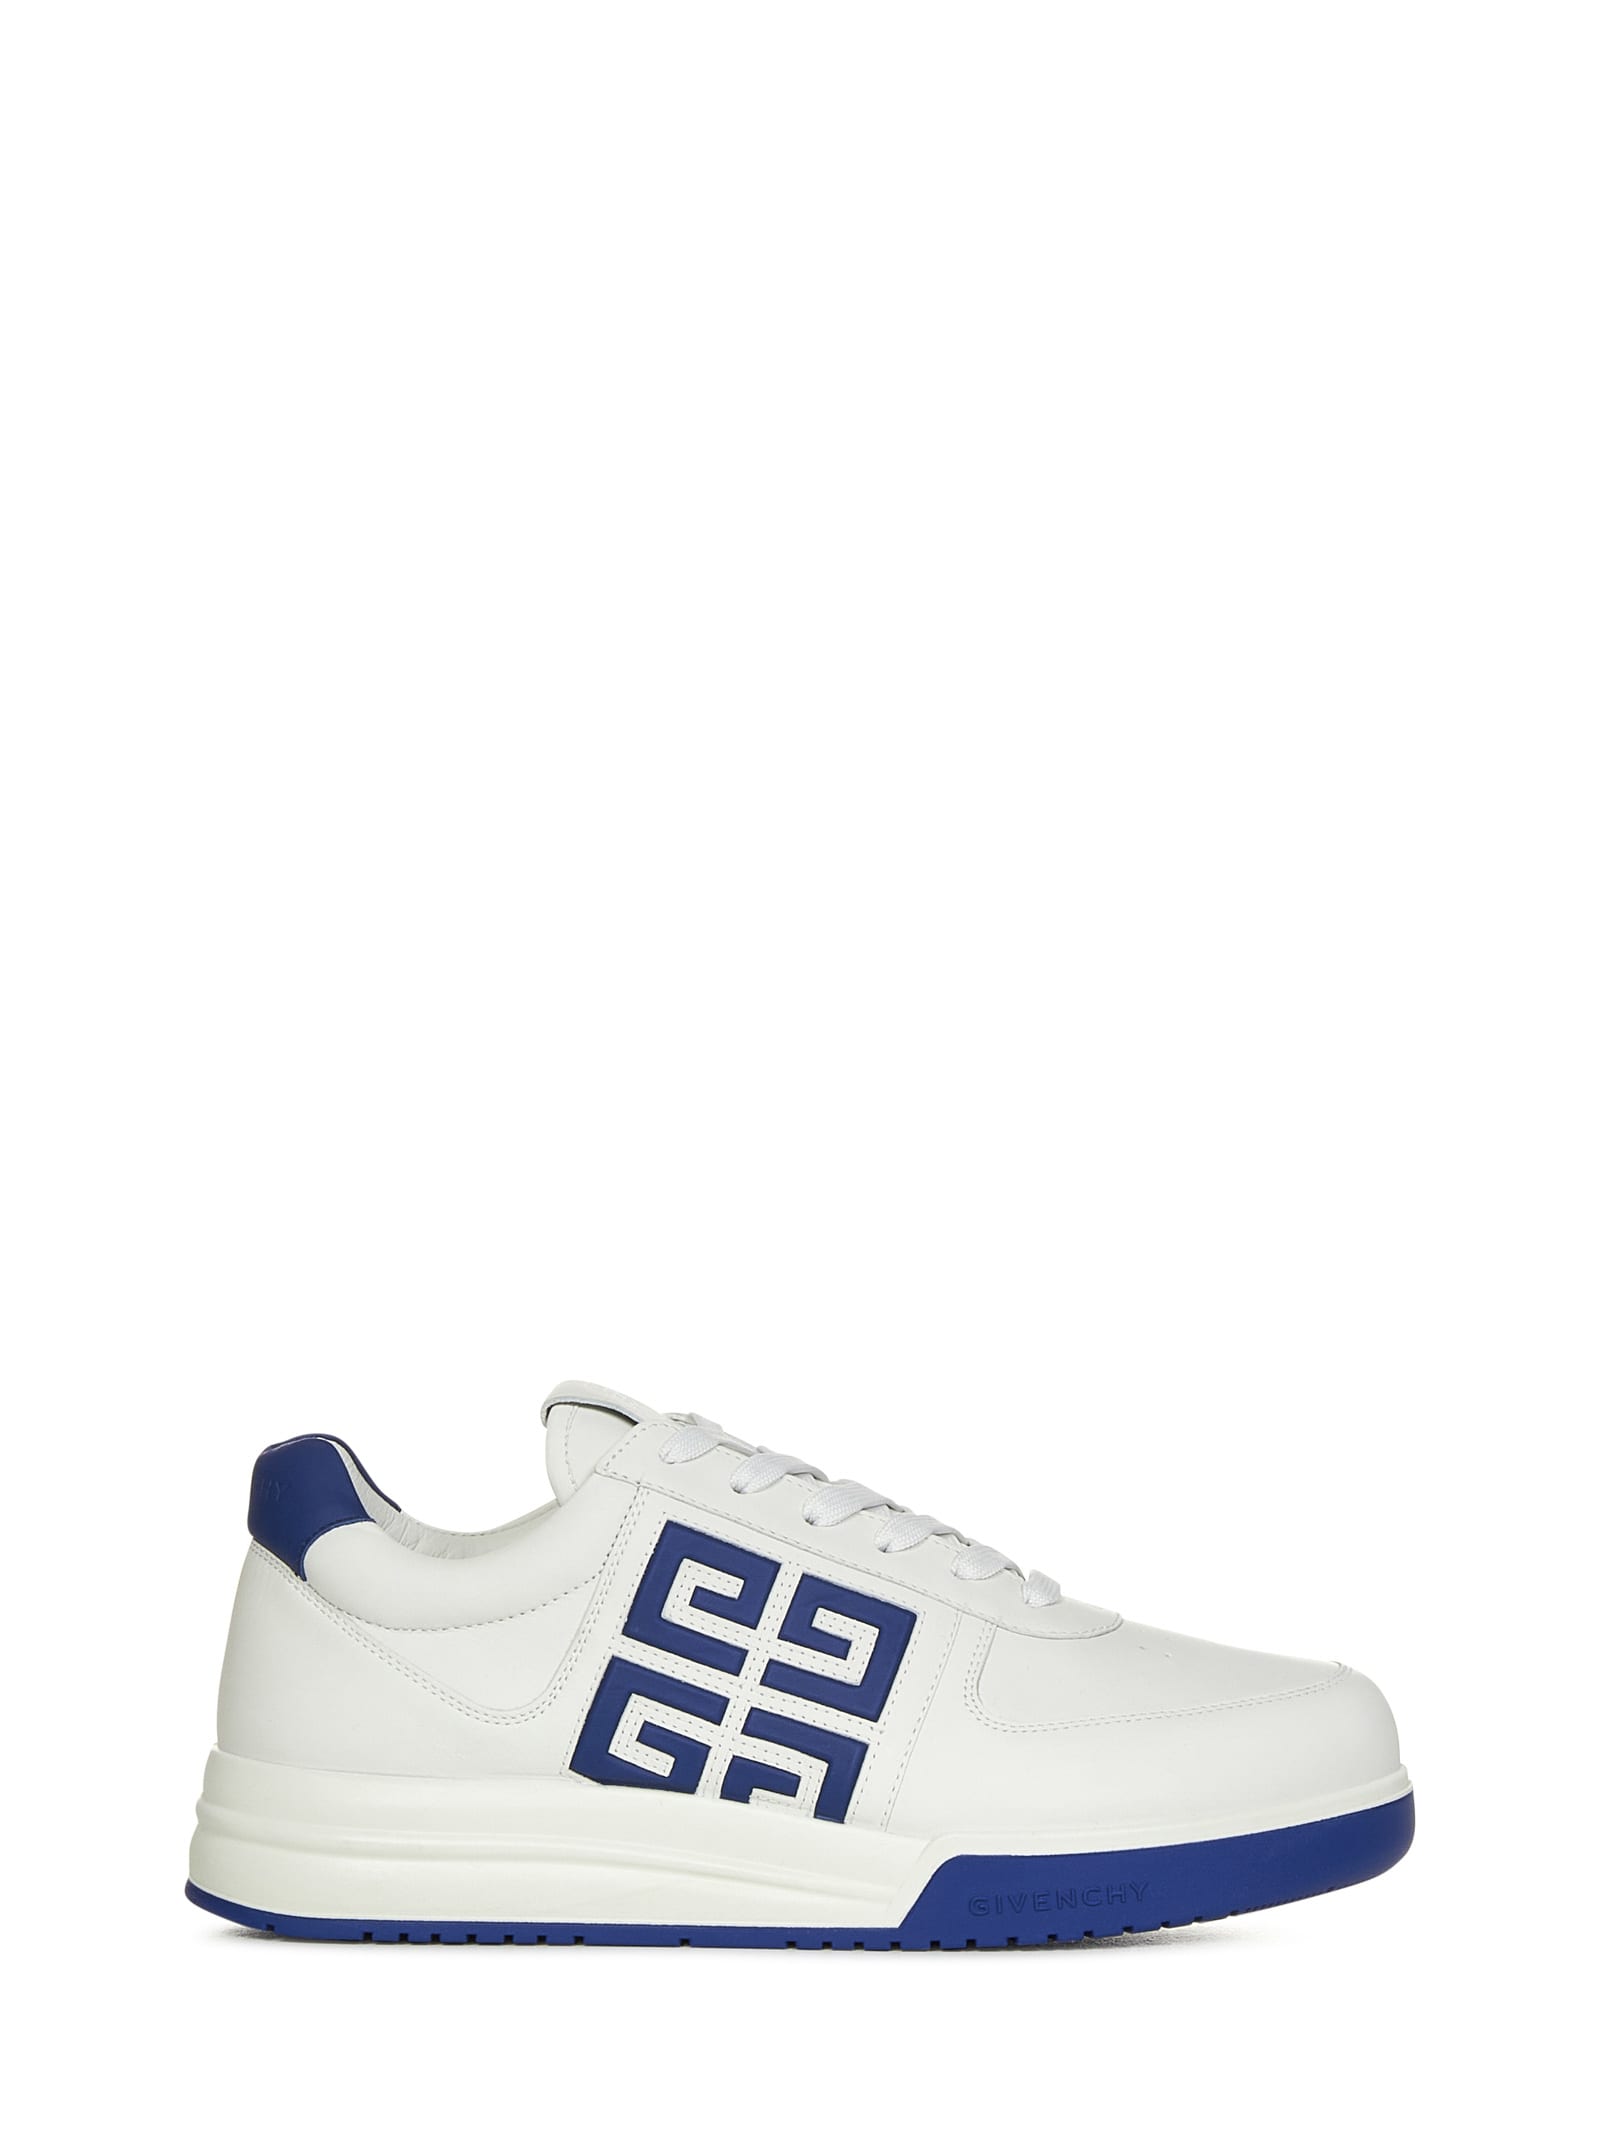 GIVENCHY G4 SNEAKERS